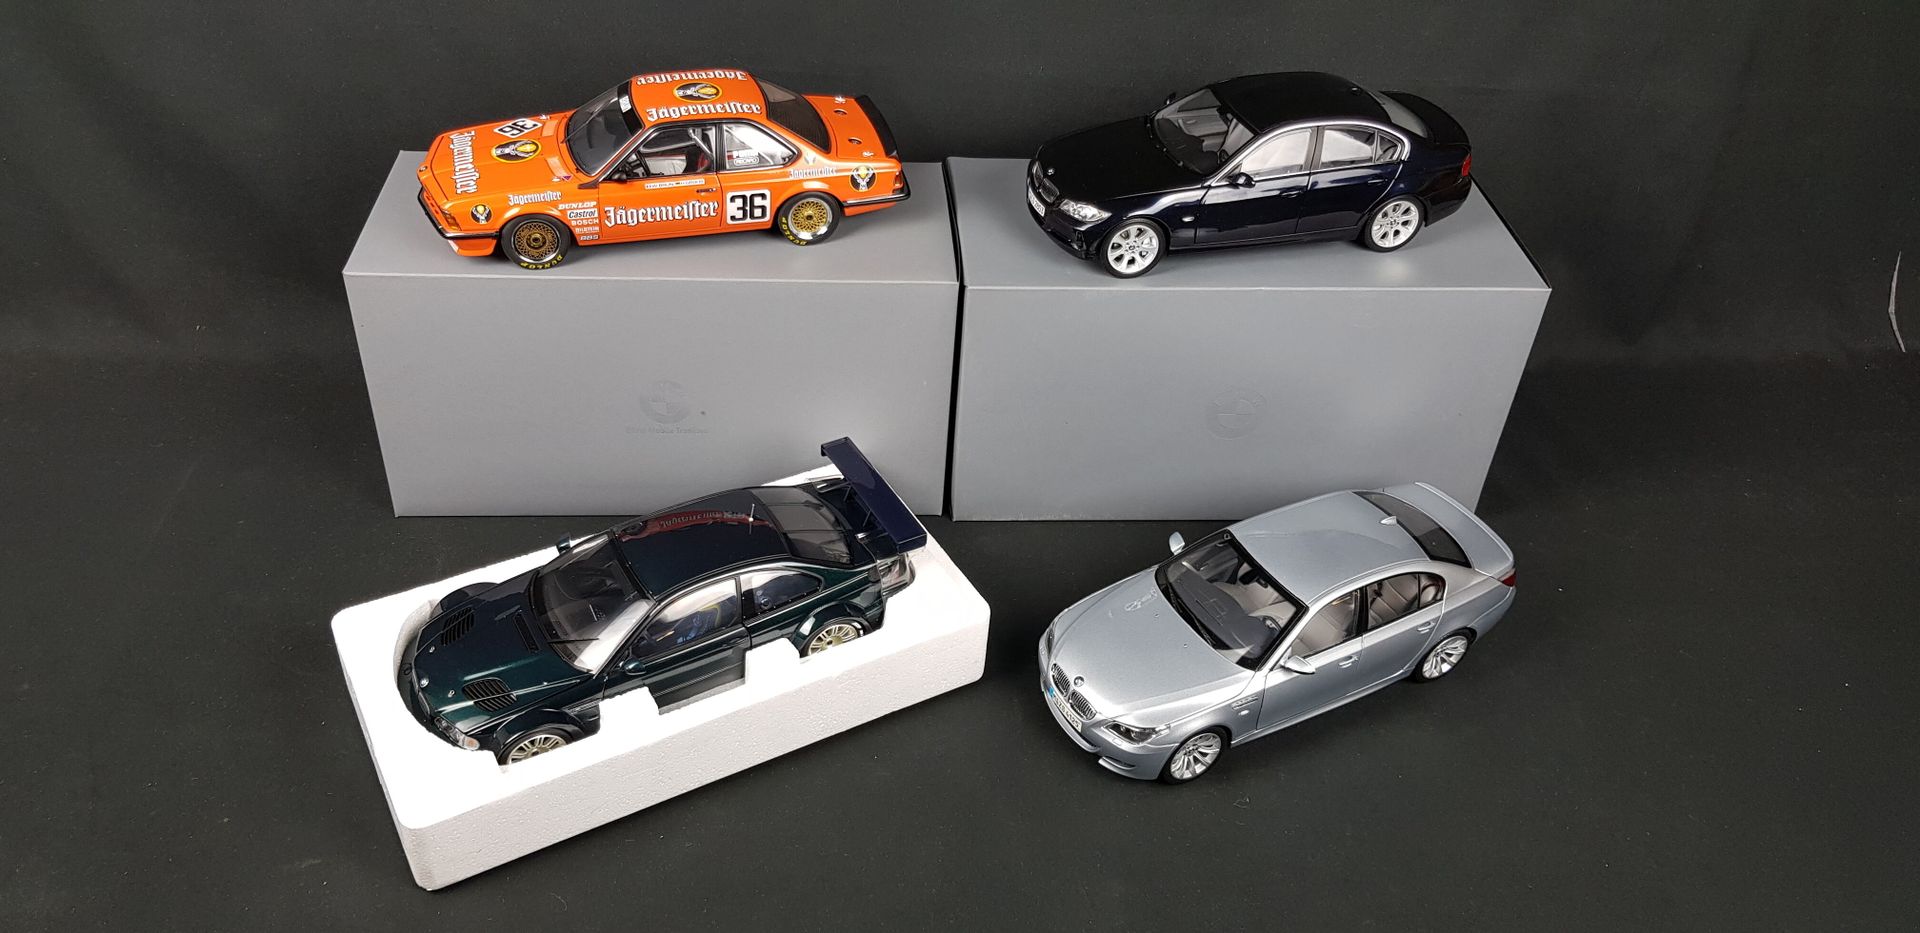 Null BMW - FOUR BMW 1/18 scale :

1x M5

1x M3 GTR

1x 635Csi

1x 3Series

In th&hellip;